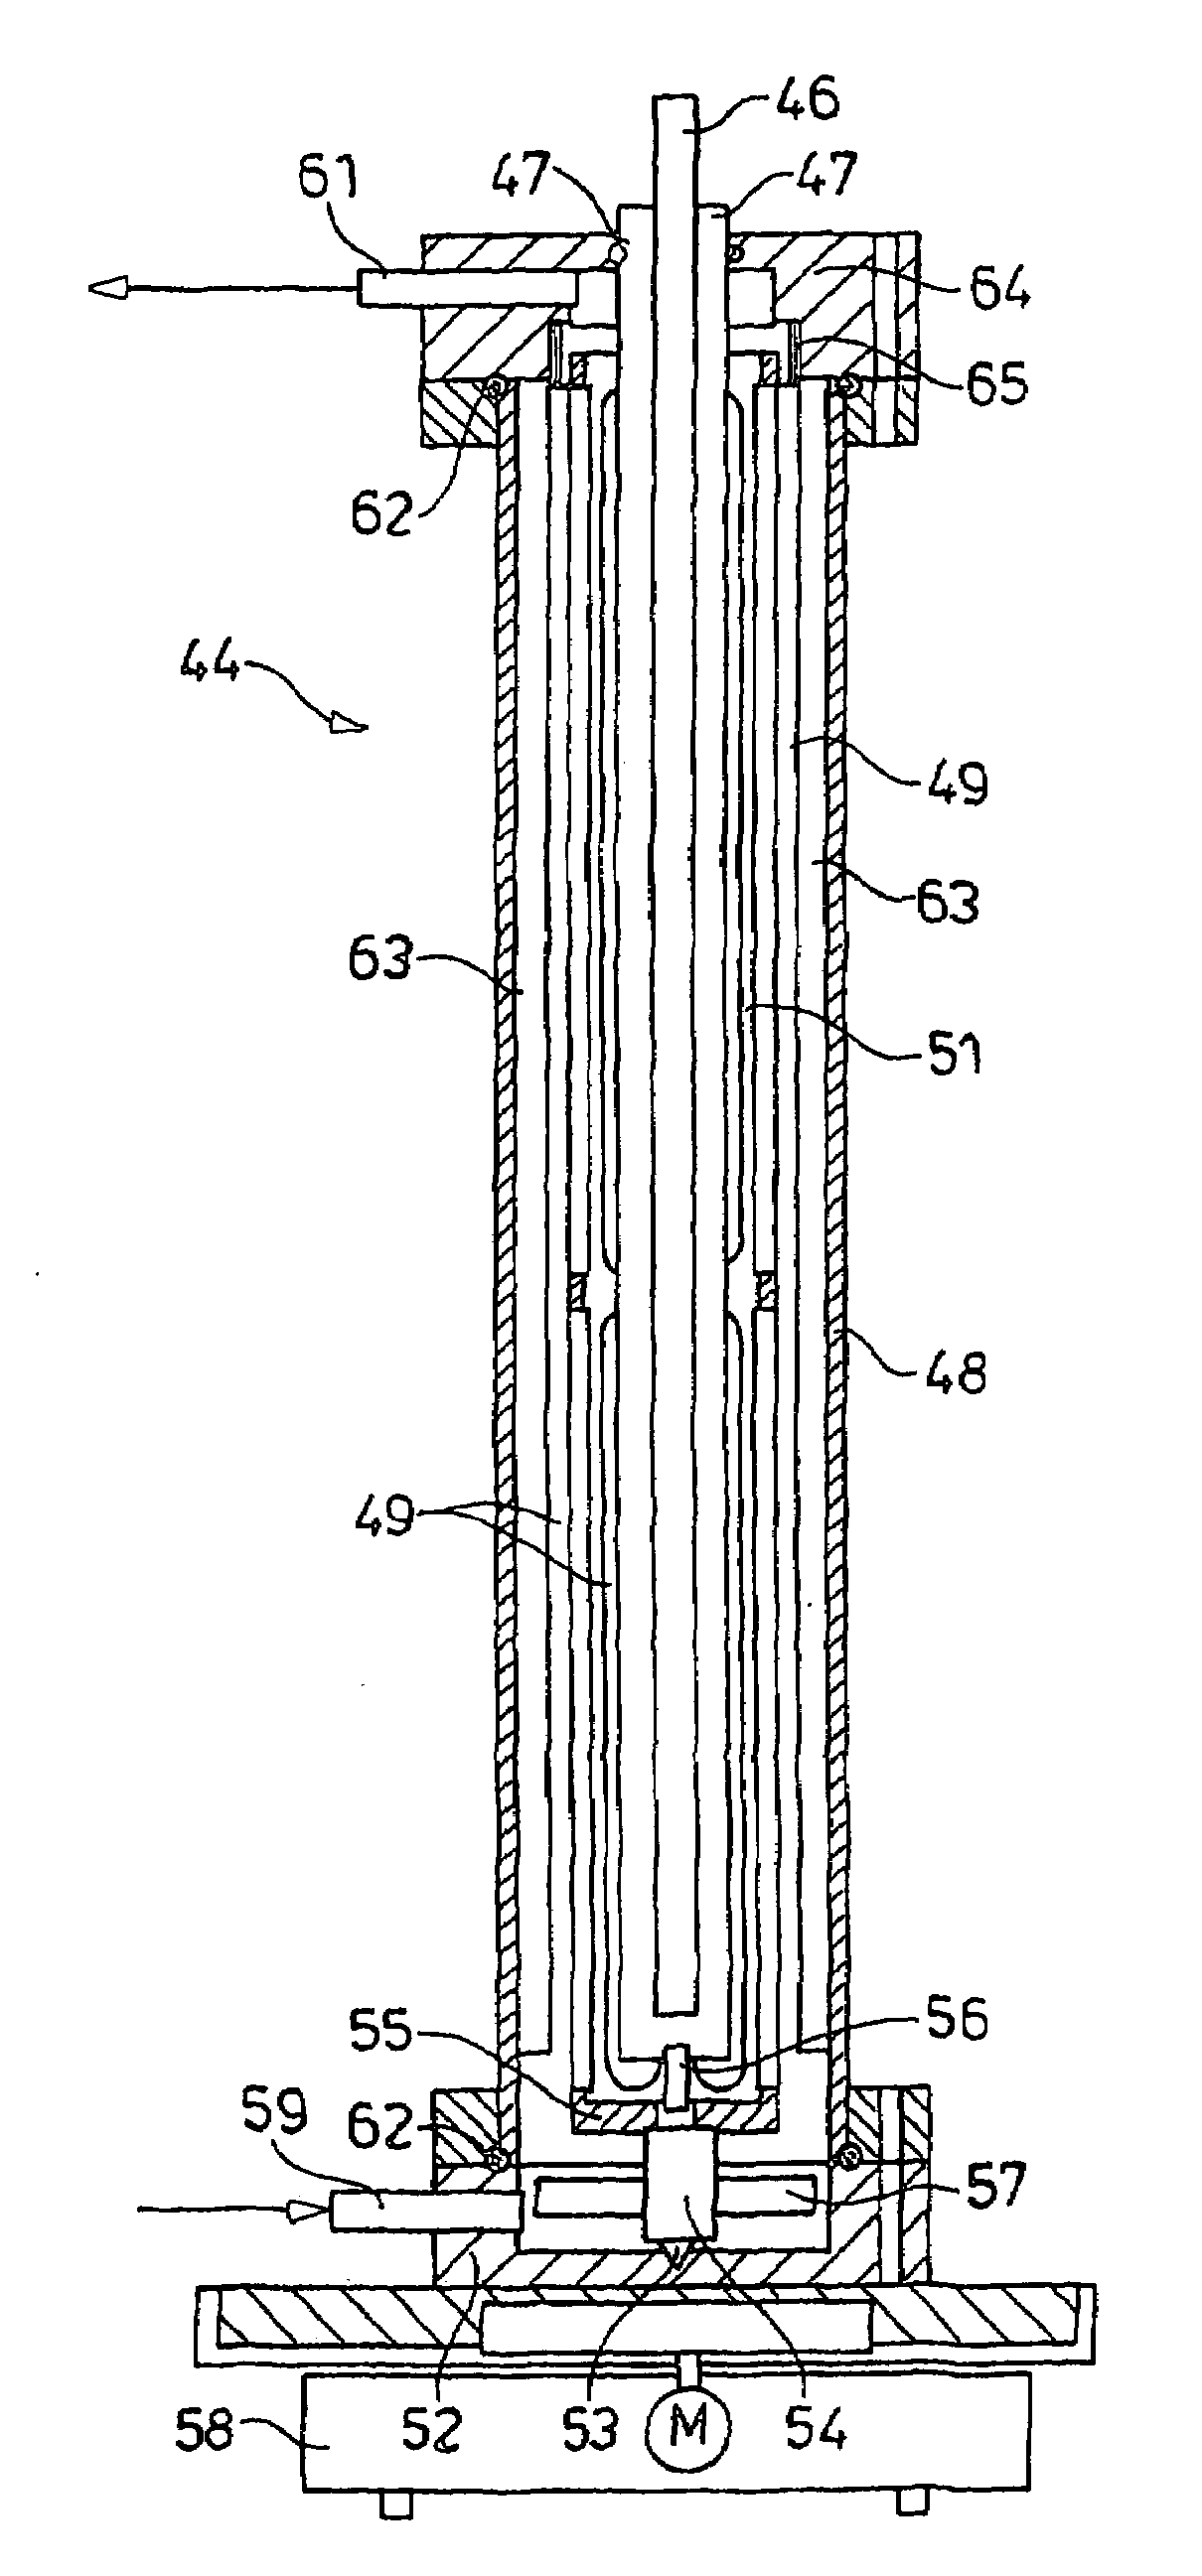 Method of inactivating microorganisms in a fluid using ultraviolet radiation